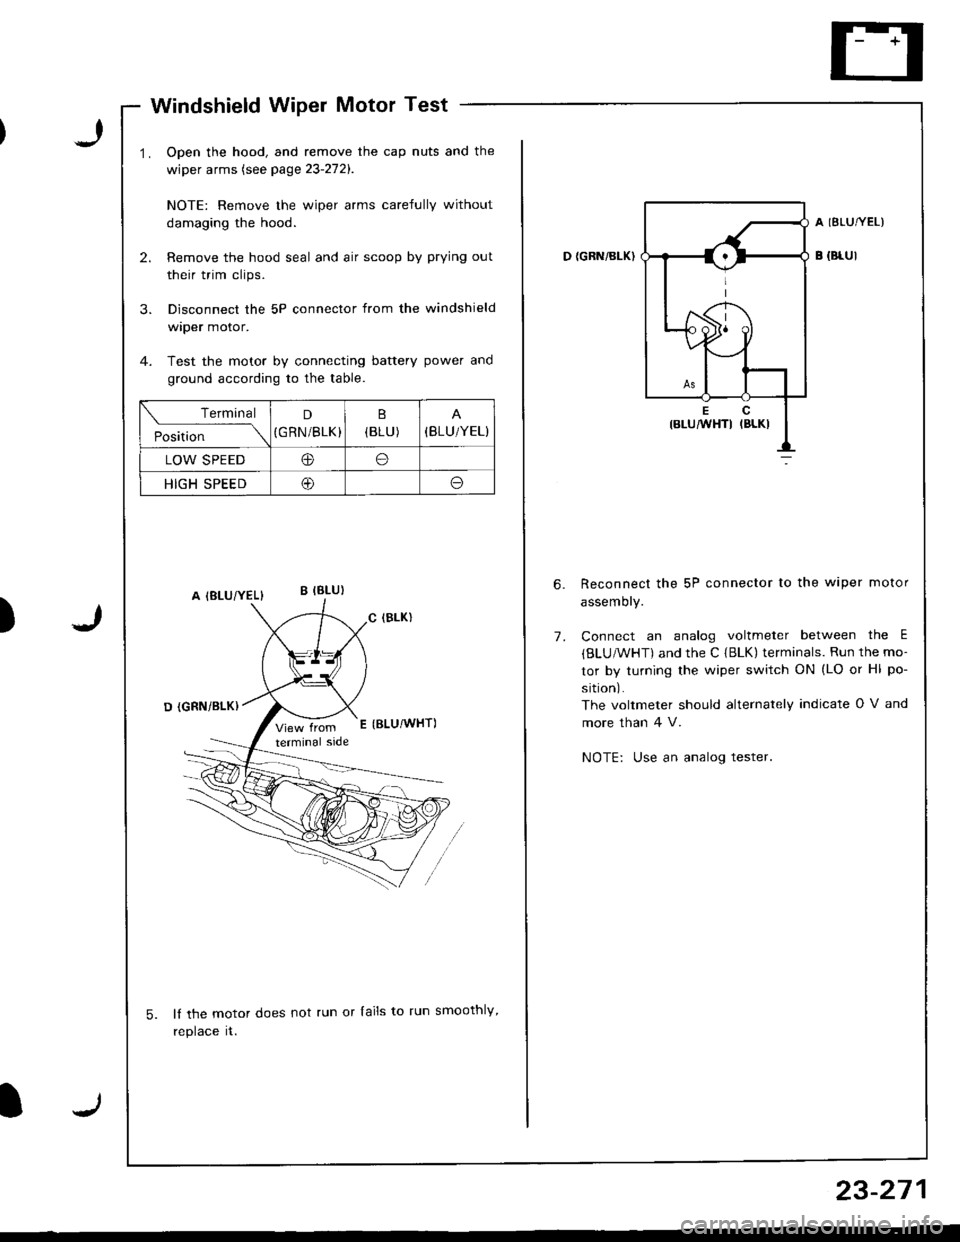 HONDA INTEGRA 1998 4.G Owners Guide I
Windshield Wiper Motor Test
Open the hood, and remove the cap nuts and the
wiper arms (see page 23-272).
NOTE: Remove the wiper arms carefully without
damaging the hood.
Remove the hood seal and air